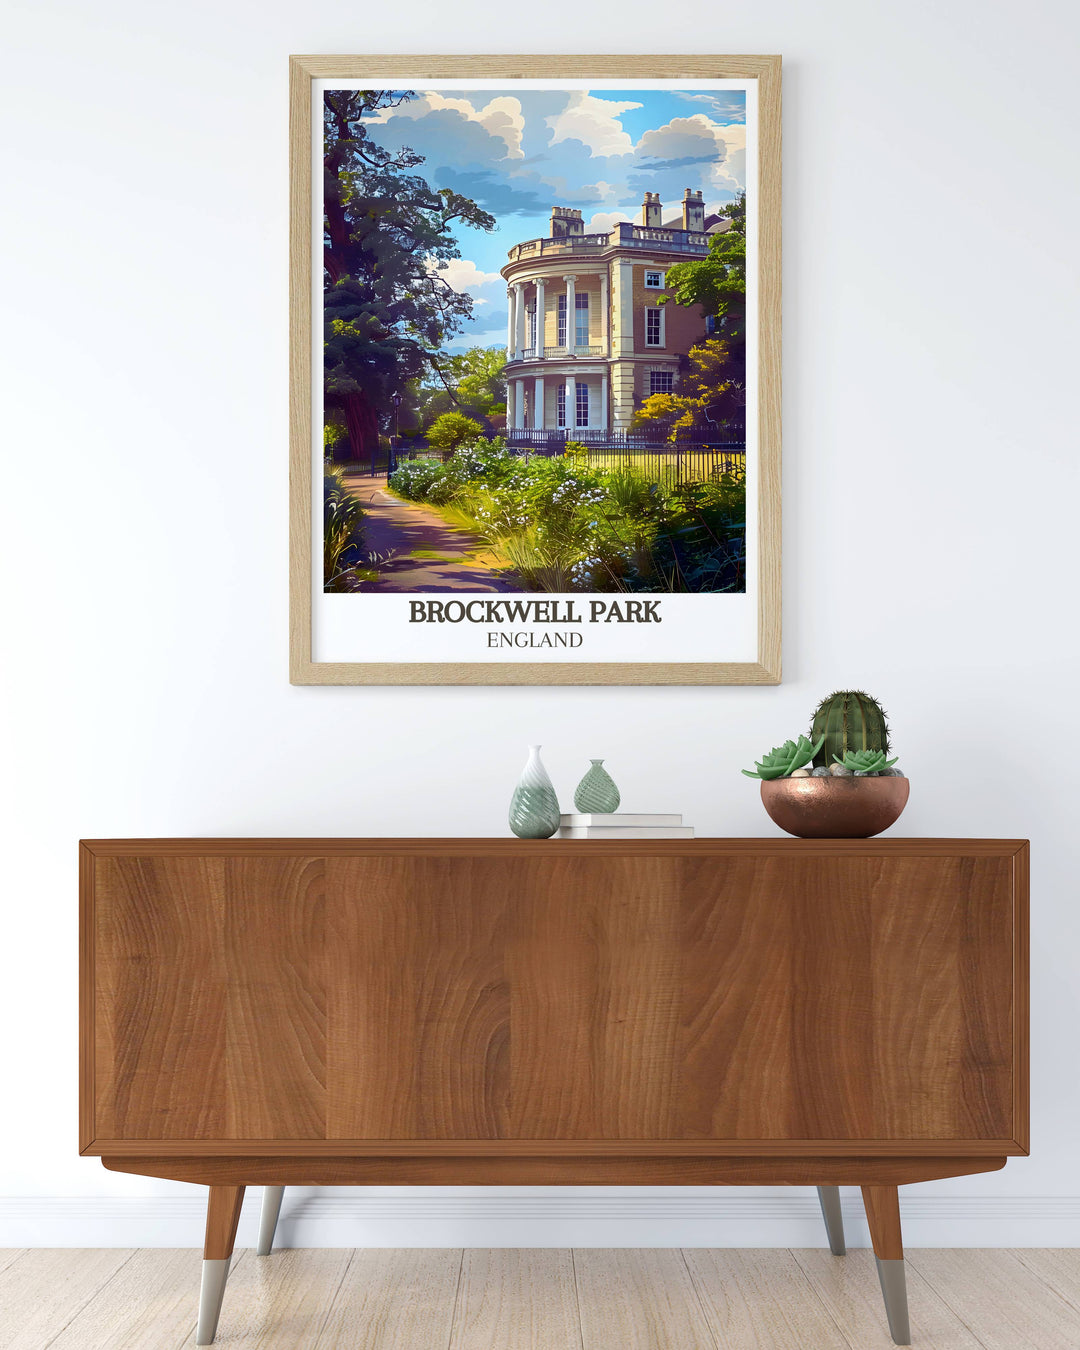 Brockwell Park art print showing Brockwell Hall amidst vibrant spring greenery, perfect for London wall art enthusiasts